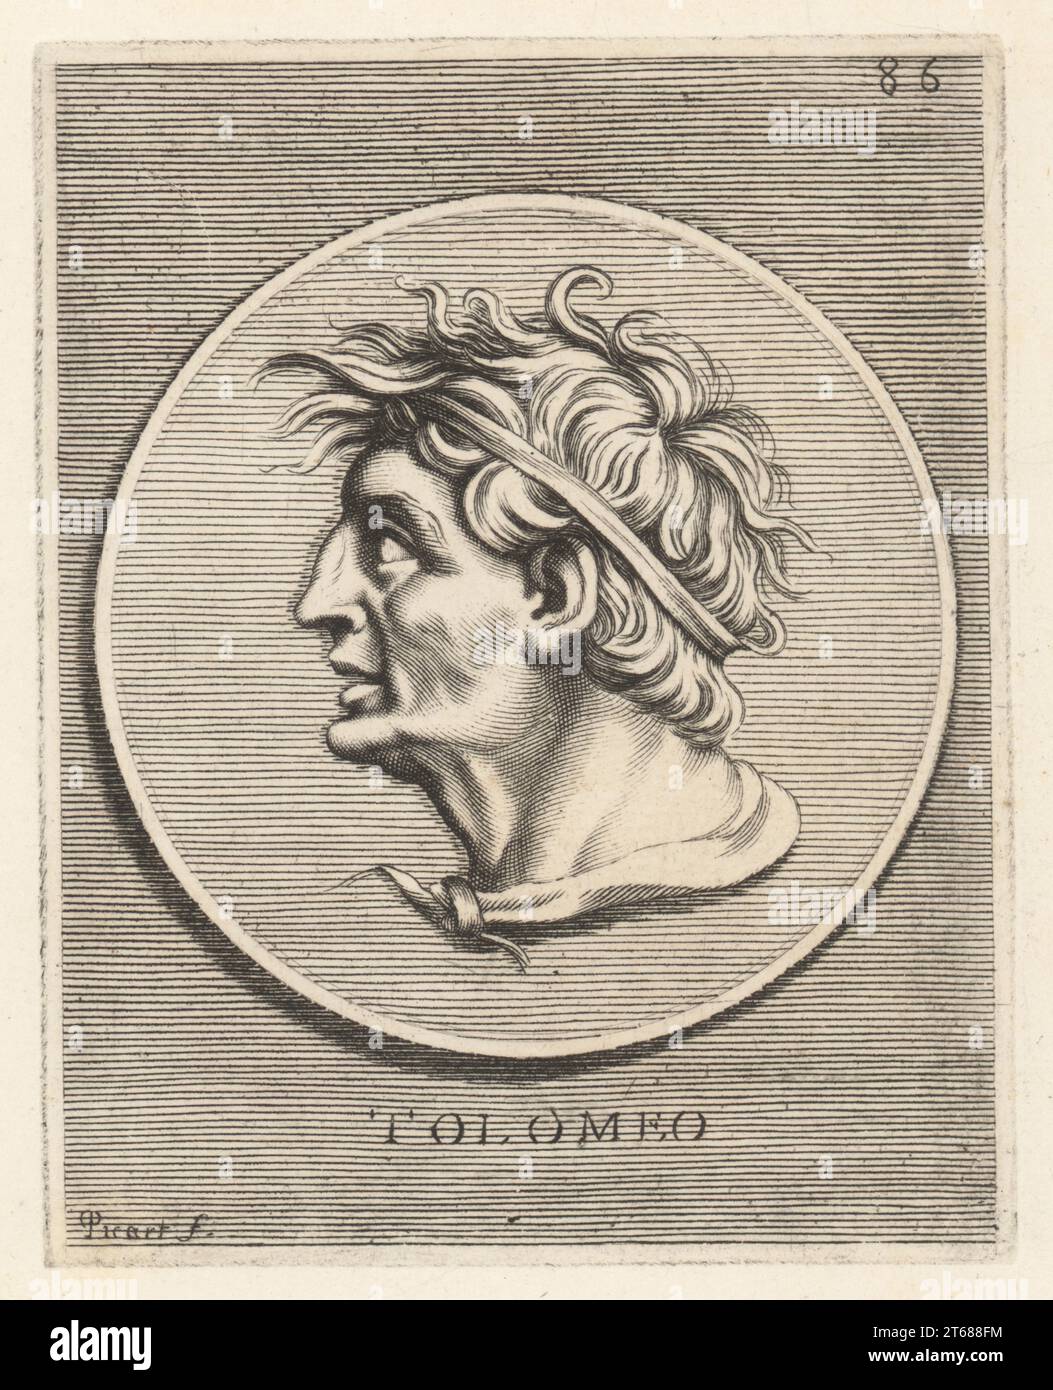 Ptolemy I Soter, c. 367-282 BC, Macedonian general under Alexander the Great who became ruler of Egypt and founder of the Ptolemaic dynasty. From a bronze coin. Tolomeo. Copperplate engraving by Etienne Picart after Giovanni Angelo Canini from Iconografia, cioe disegni d'imagini de famosissimi monarchi, regi, filososi, poeti ed oratori dell' Antichita, Drawings of images of famous monarchs, kings, philosophers, poets and orators of Antiquity, Ignatio deLazari, Rome, 1699. Stock Photo